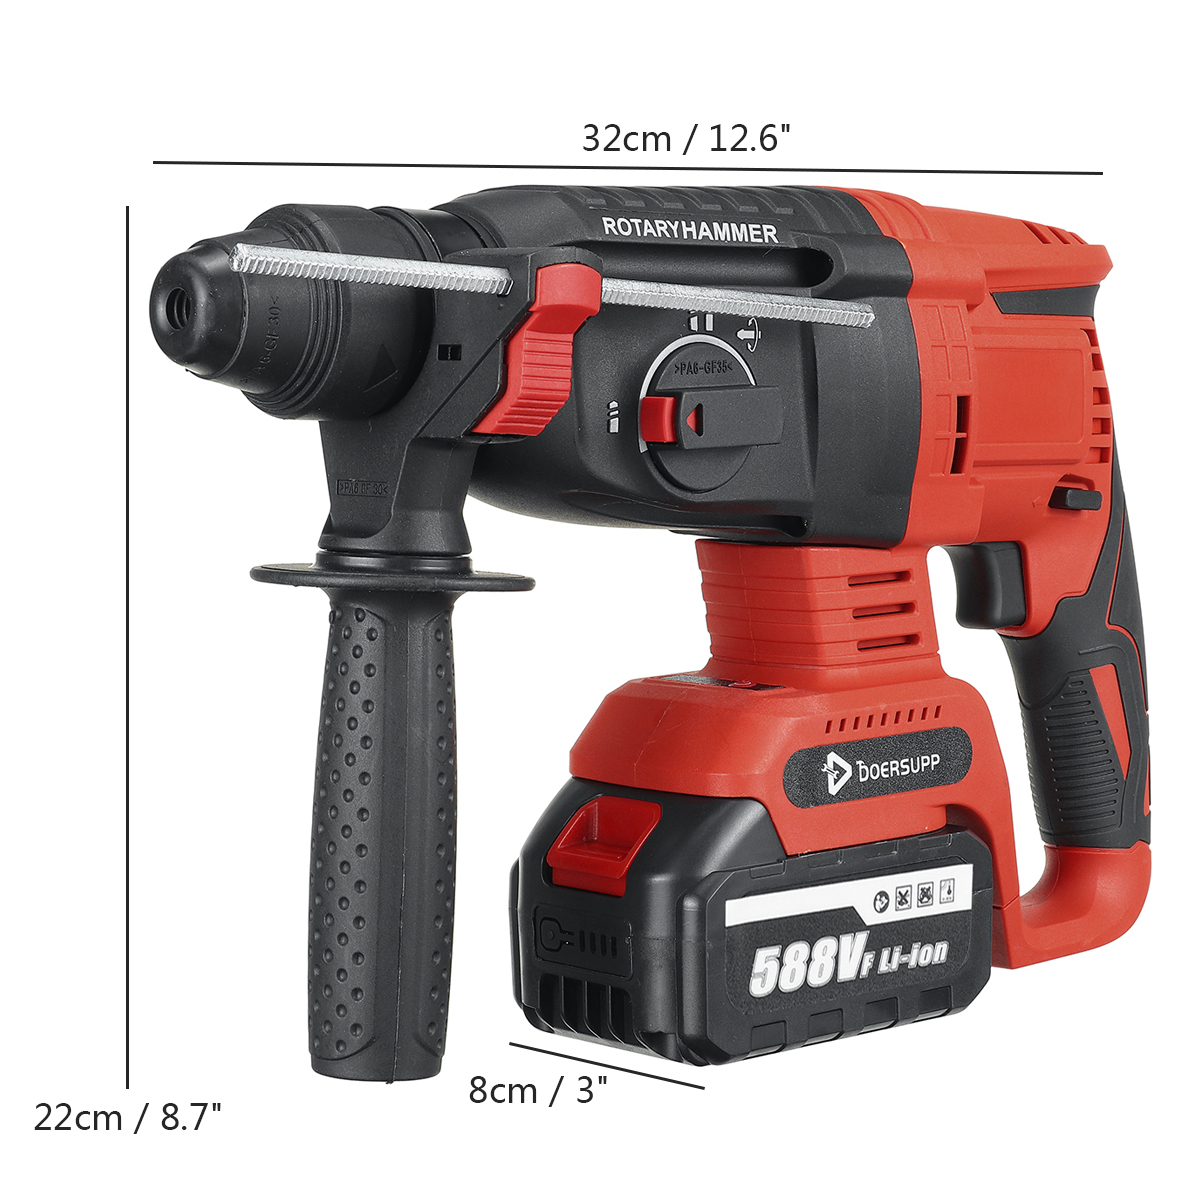 Find Doersupp 588VF Cordless Brushless Rechargeable Electric Hammer Electric Drill Household W/1pc/2pcs Battery EU/US Plug Fit MakitaBattery for Sale on Gipsybee.com with cryptocurrencies